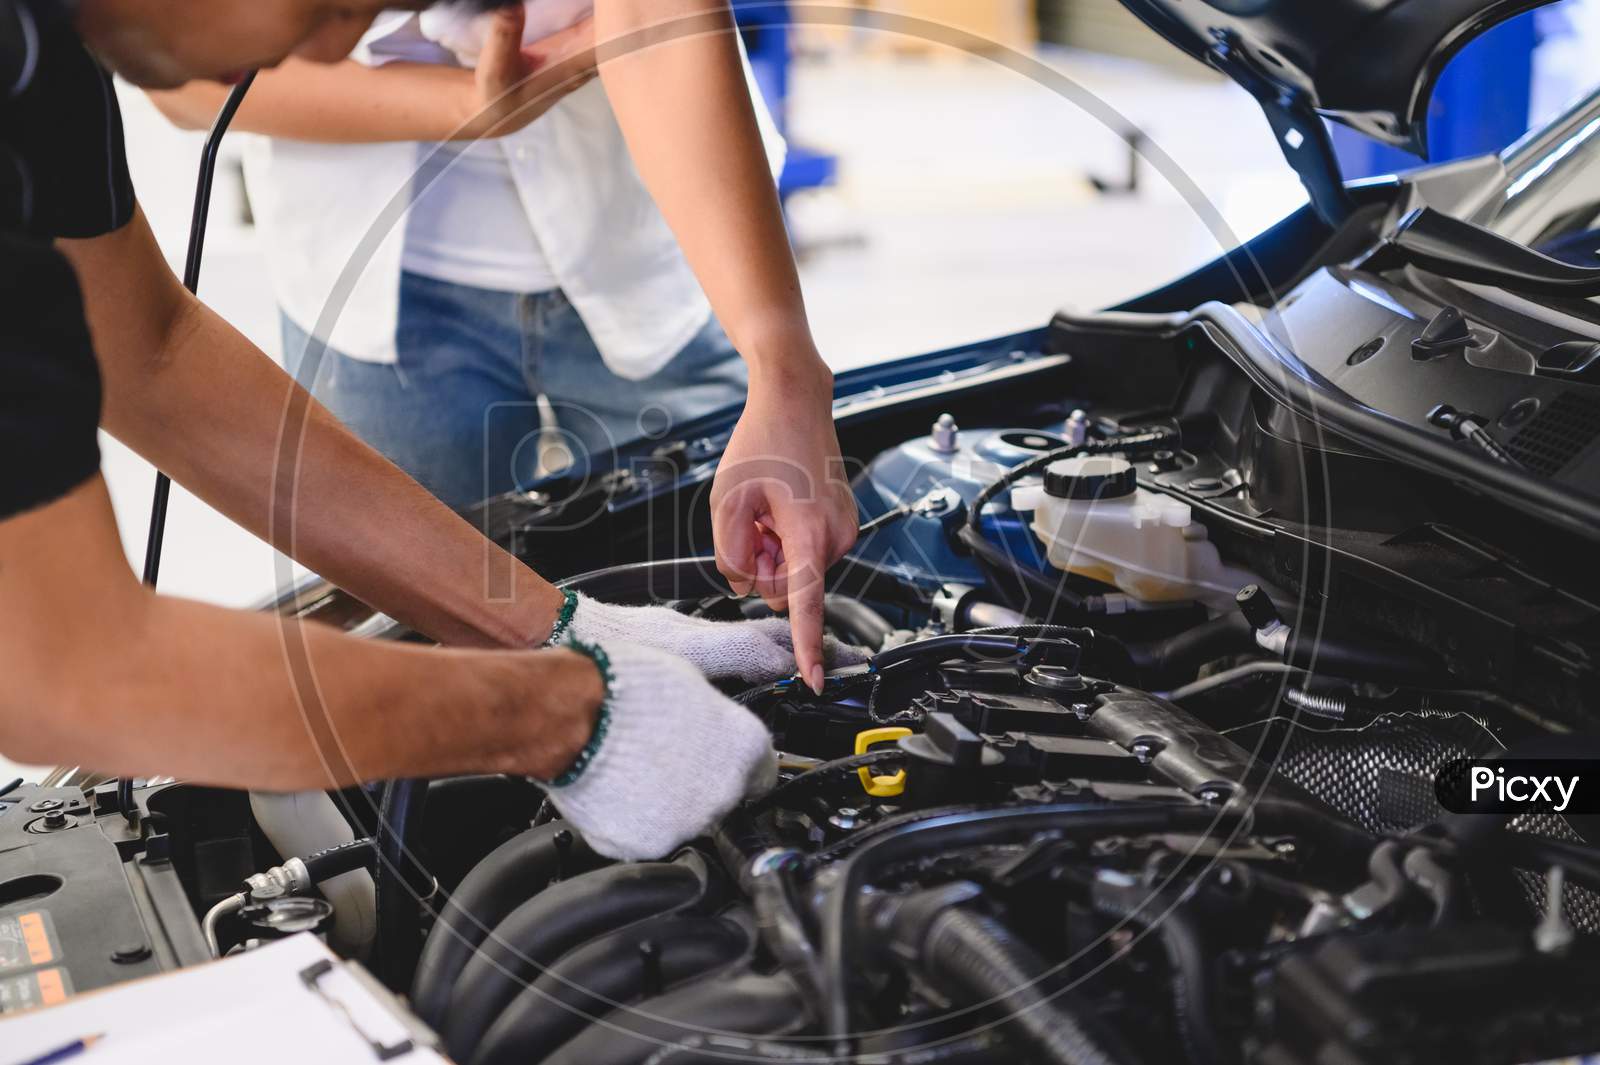 Asian Male Auto Mechanic Examine Car Engine Breakdown Problem In Front Of Automotive Vehicle Car Hood With Female Customer. Safety Technical Inspection Care Check Service Maintenance For Road Trip